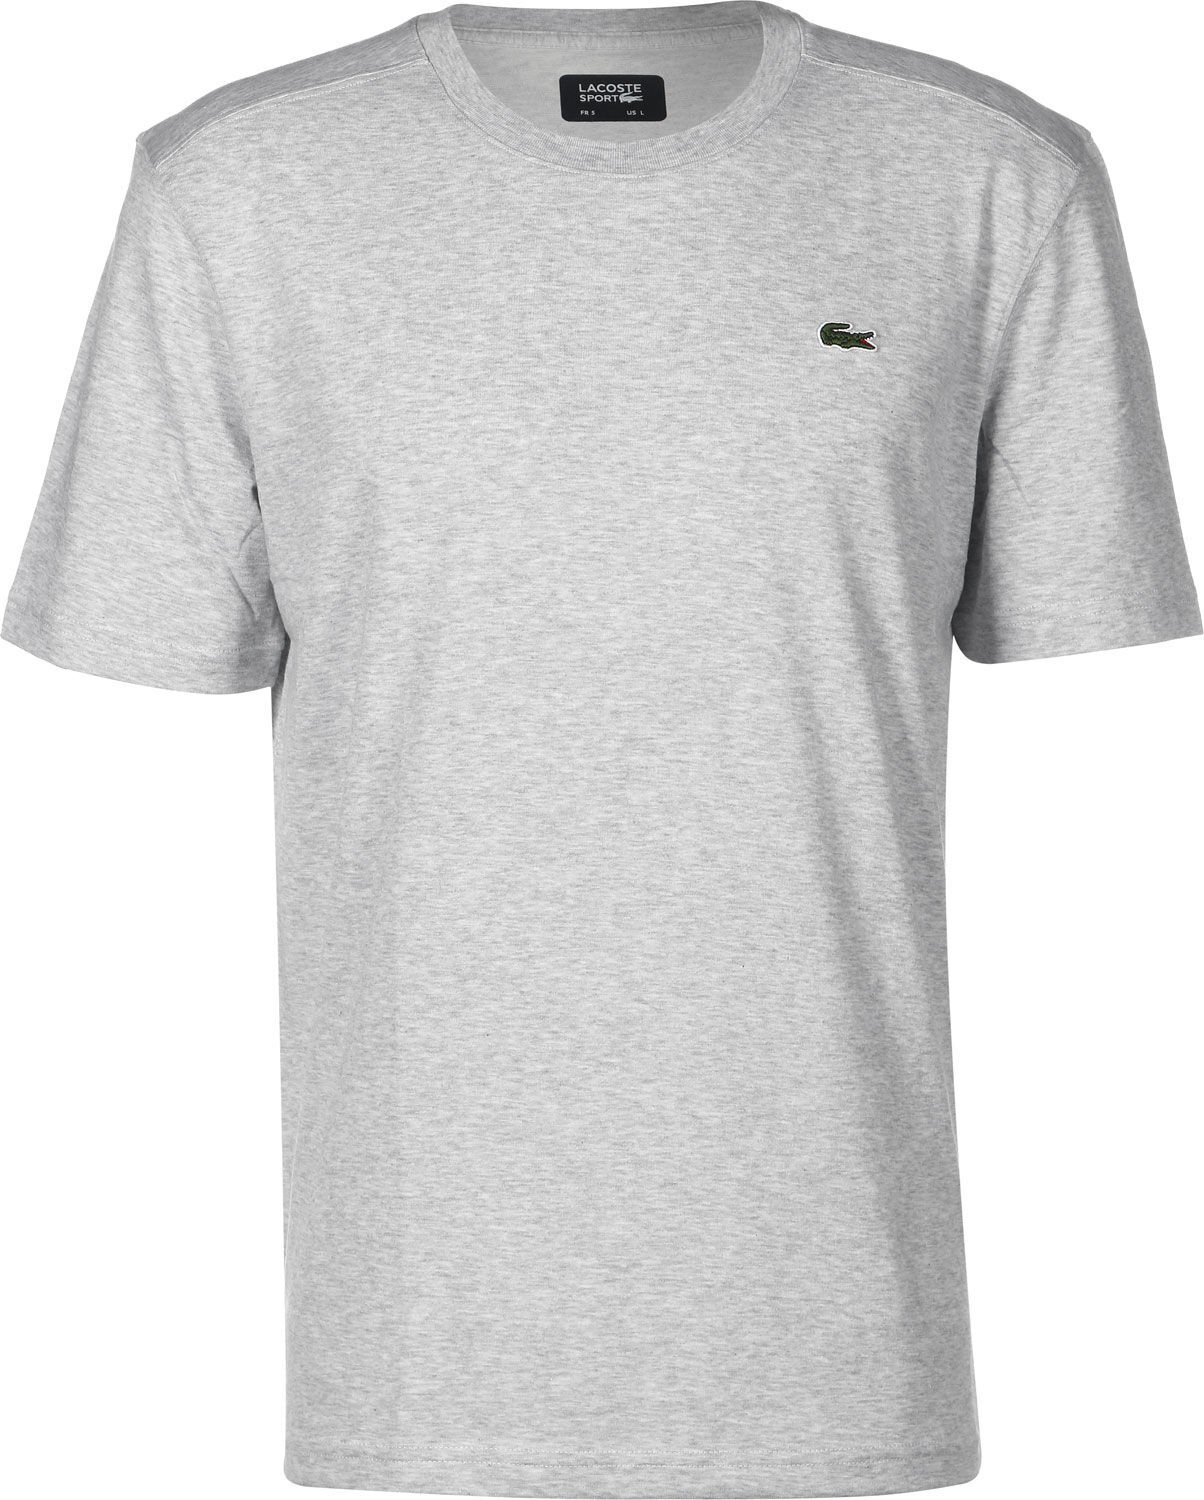 Lacoste Basic Sport Round Neck, taille S, homme, gris chiné